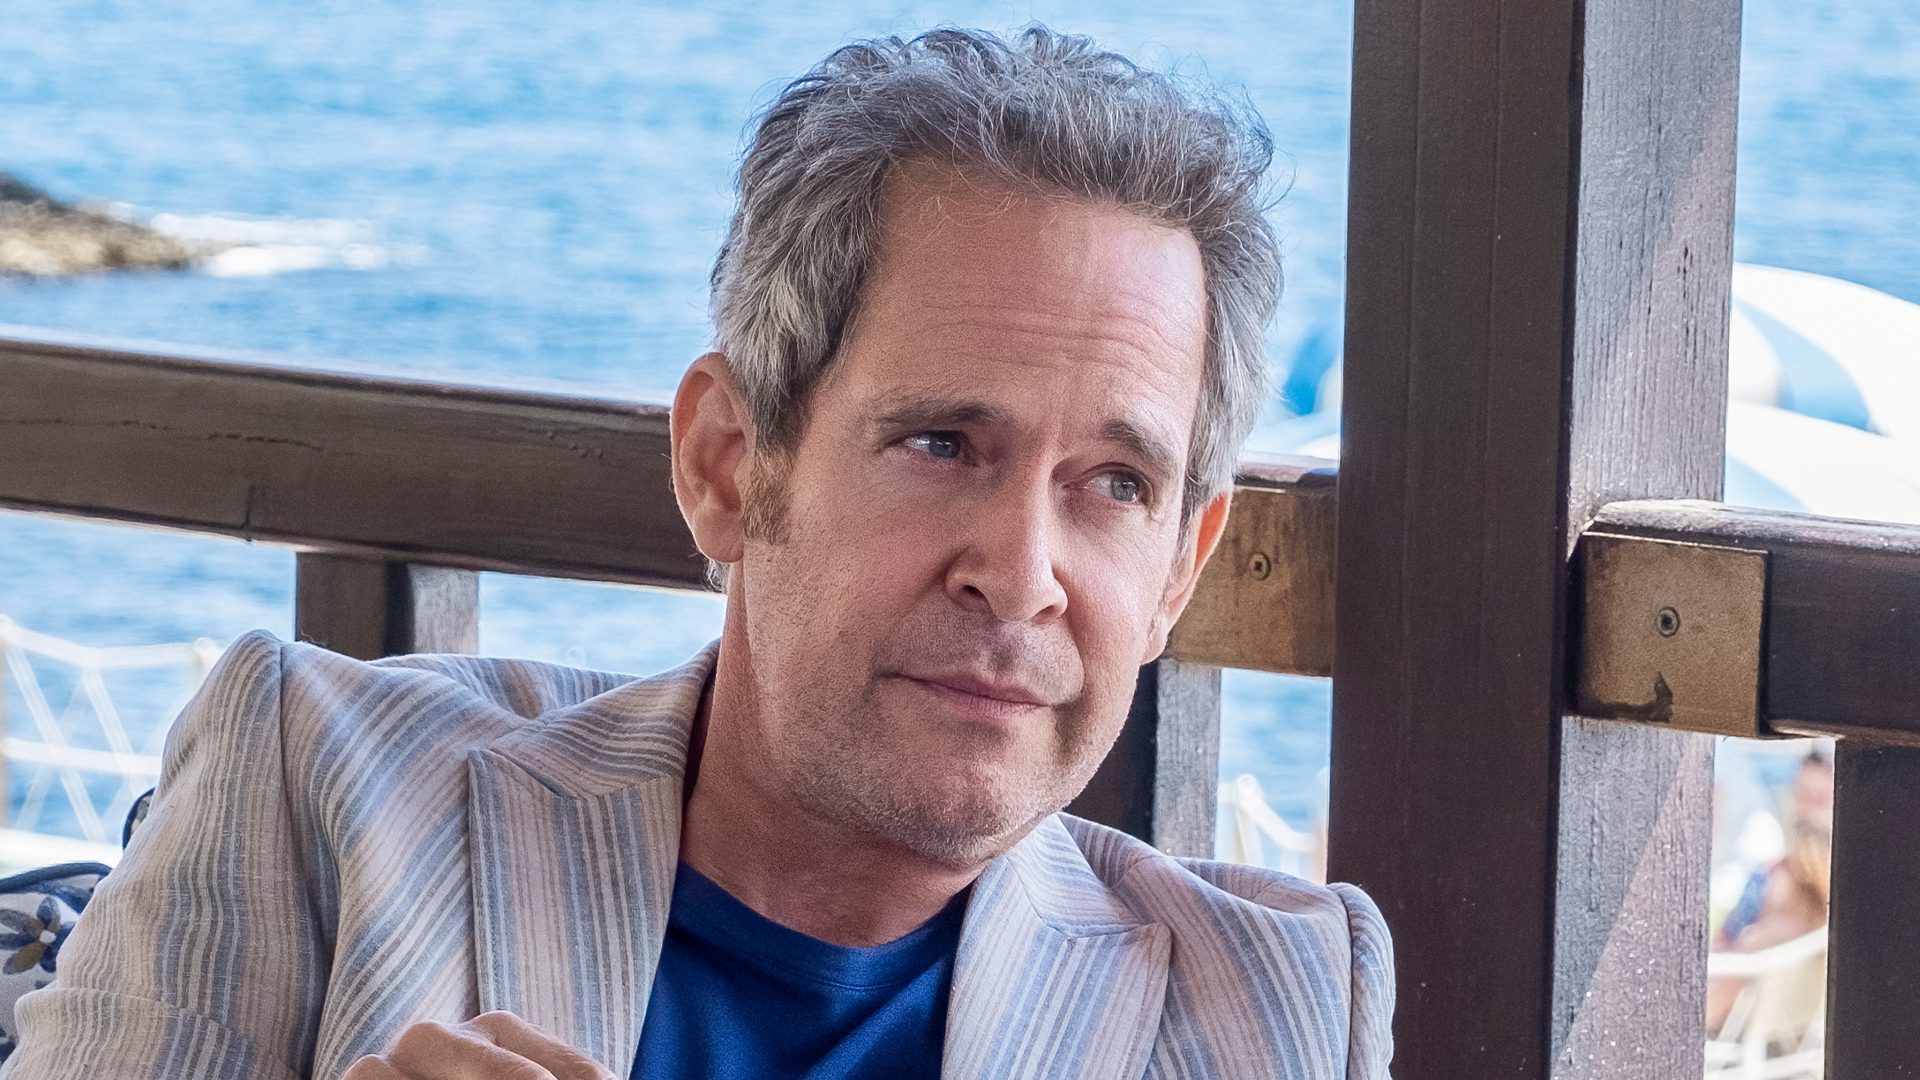 The White Lotus Cast on HBO - Tom Hollander as Quentin